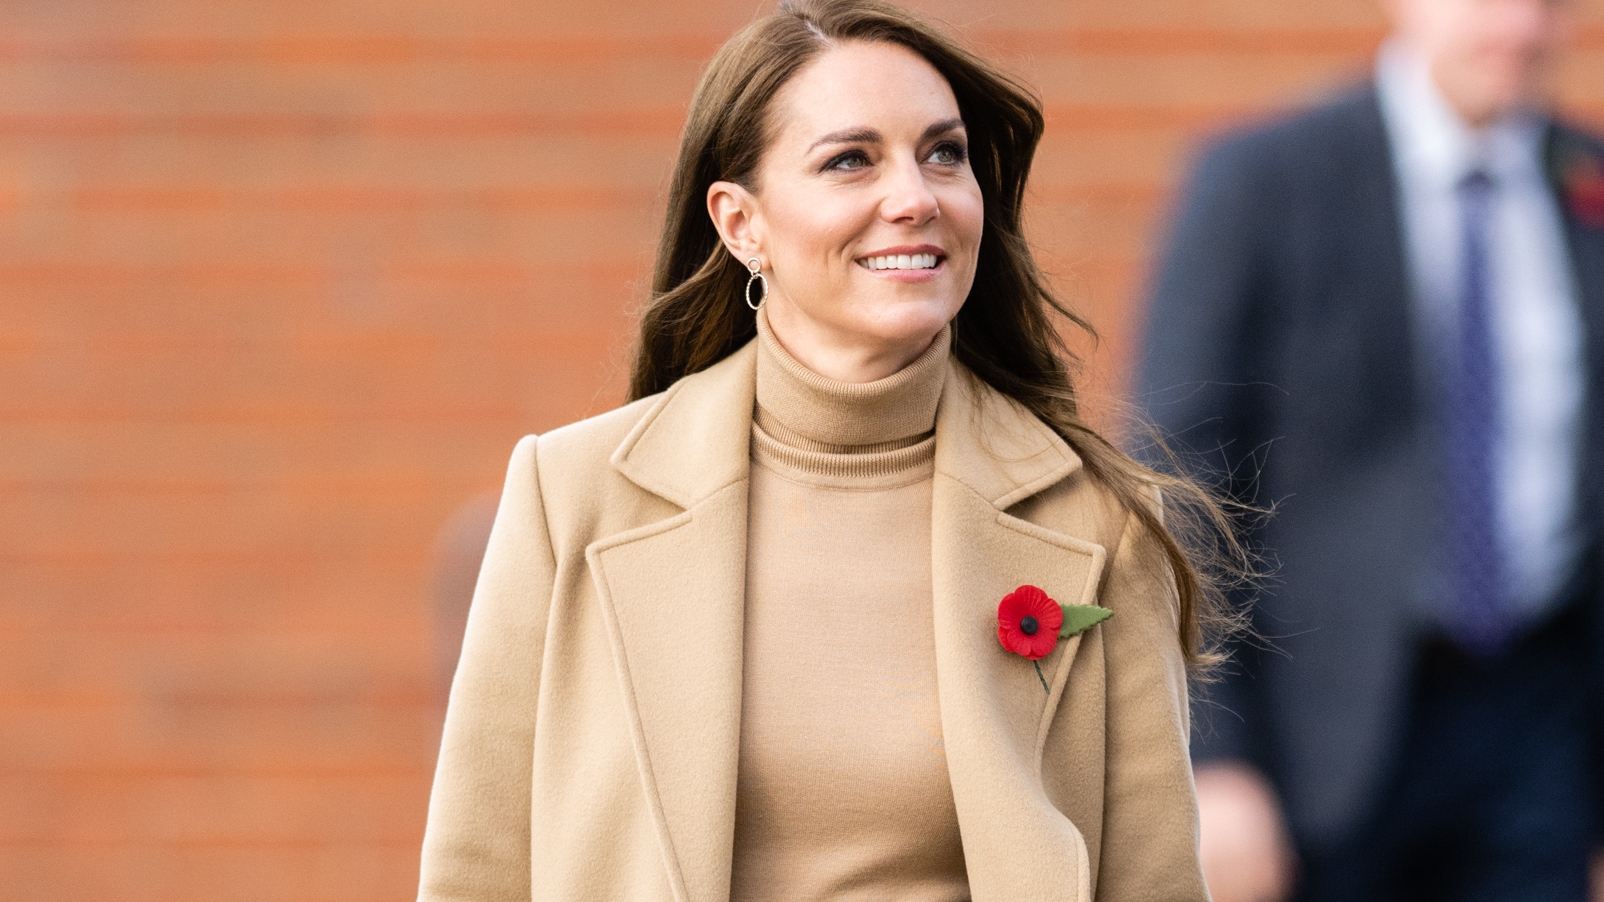 The Small Sign Kate Middleton and Meghan Markle's Style Is in Sync